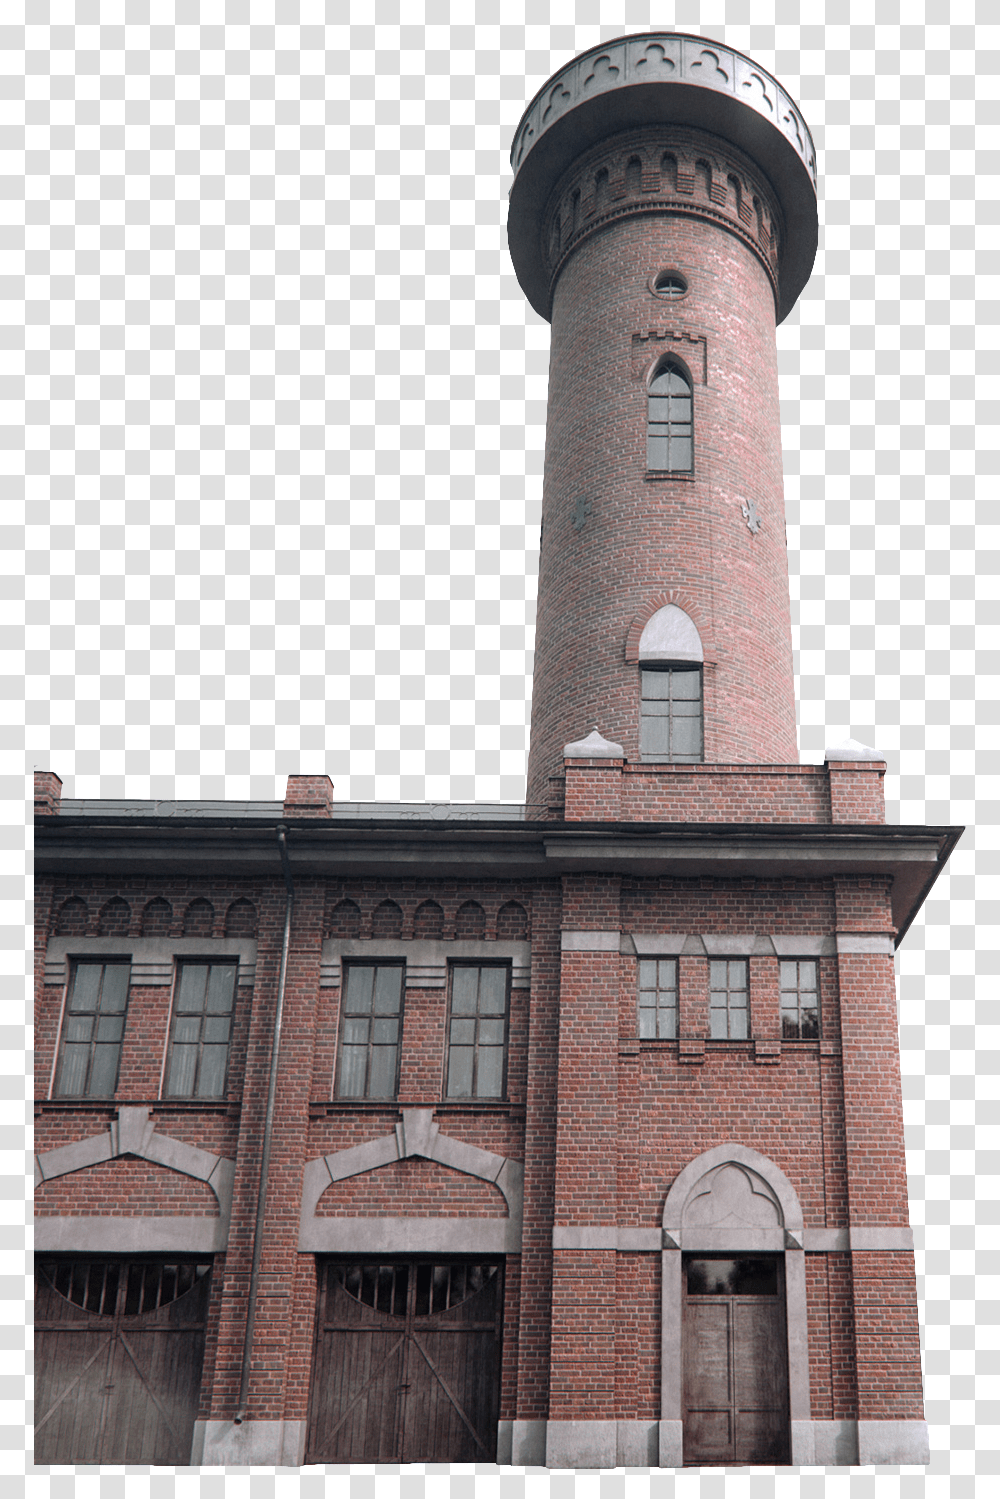 Building A Brick Wall, Tower, Architecture, Clock Tower, Door Transparent Png